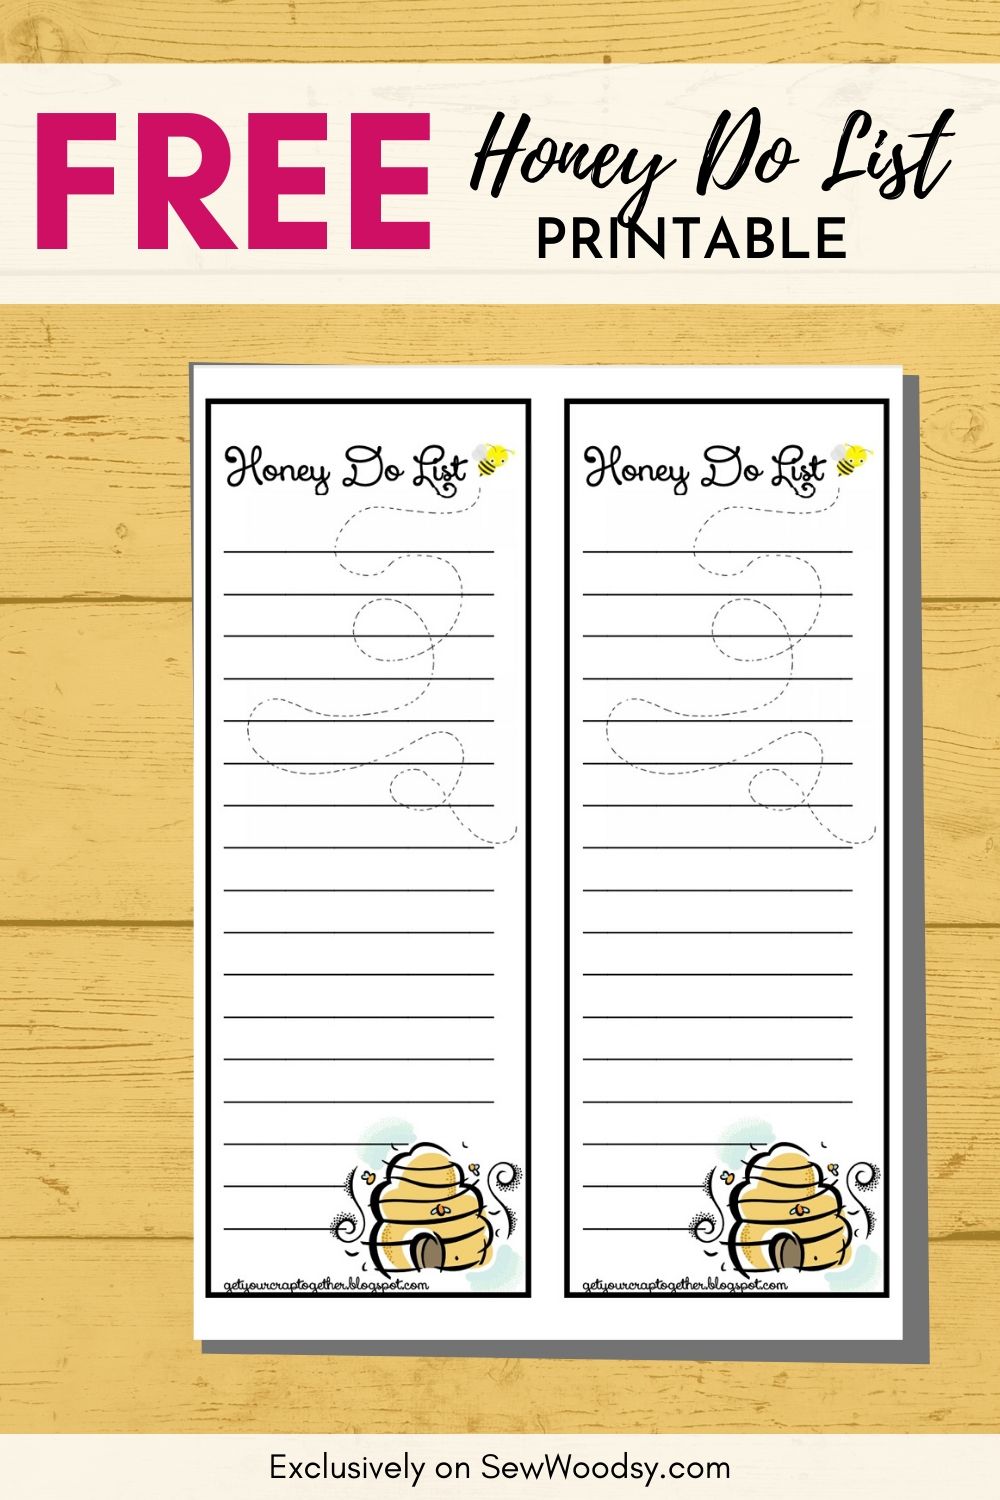 Image of the Free Printable Honey Do List with text